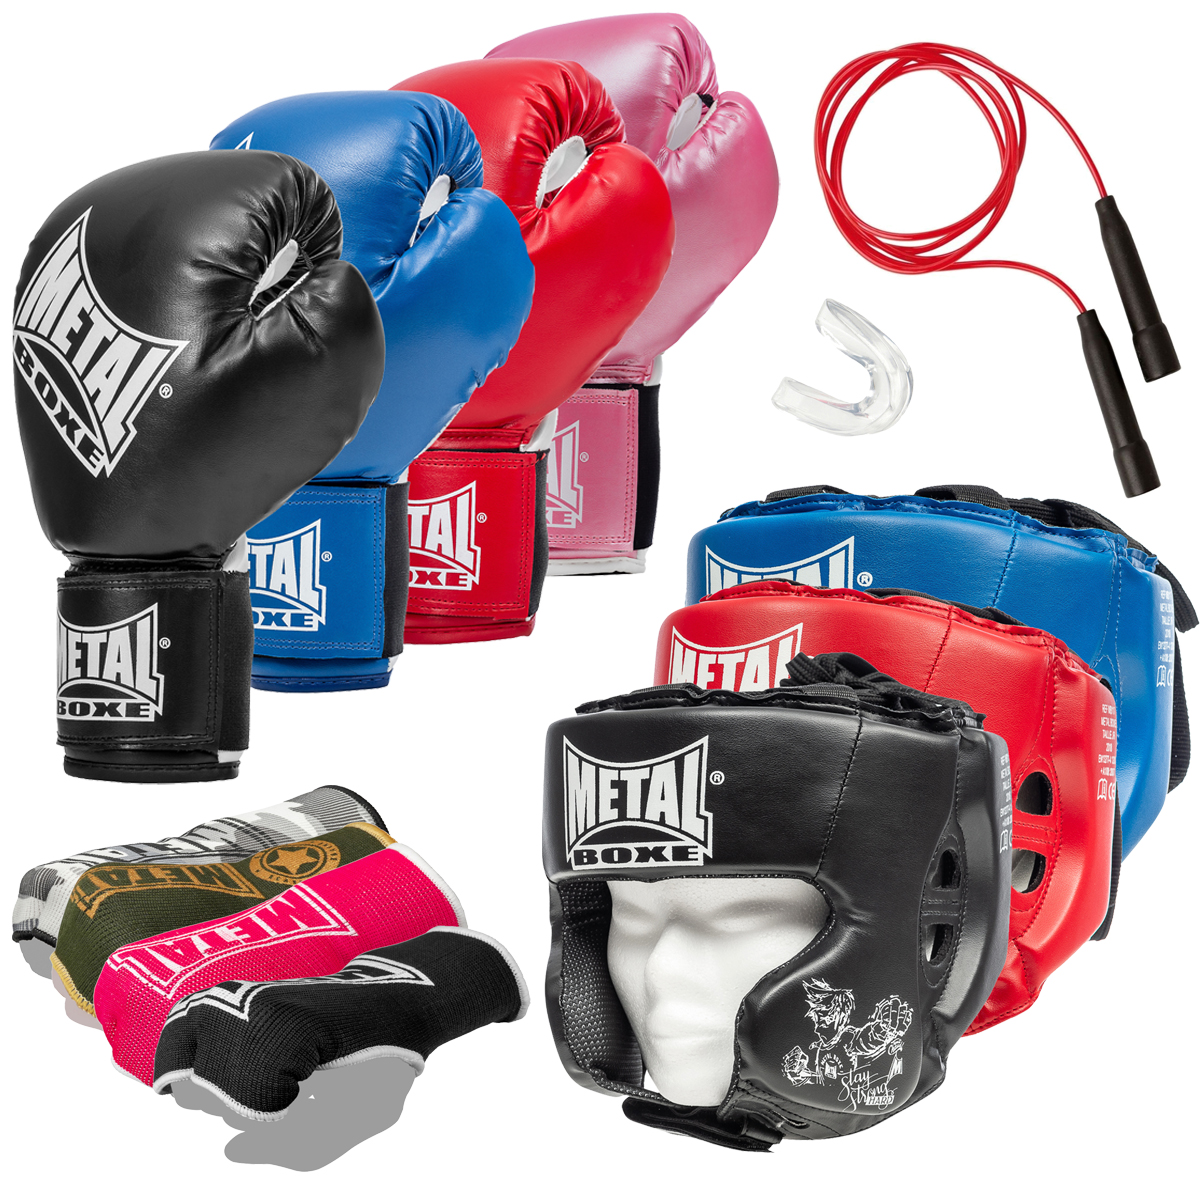 Pack Boxe Anglaise Enfant Complet